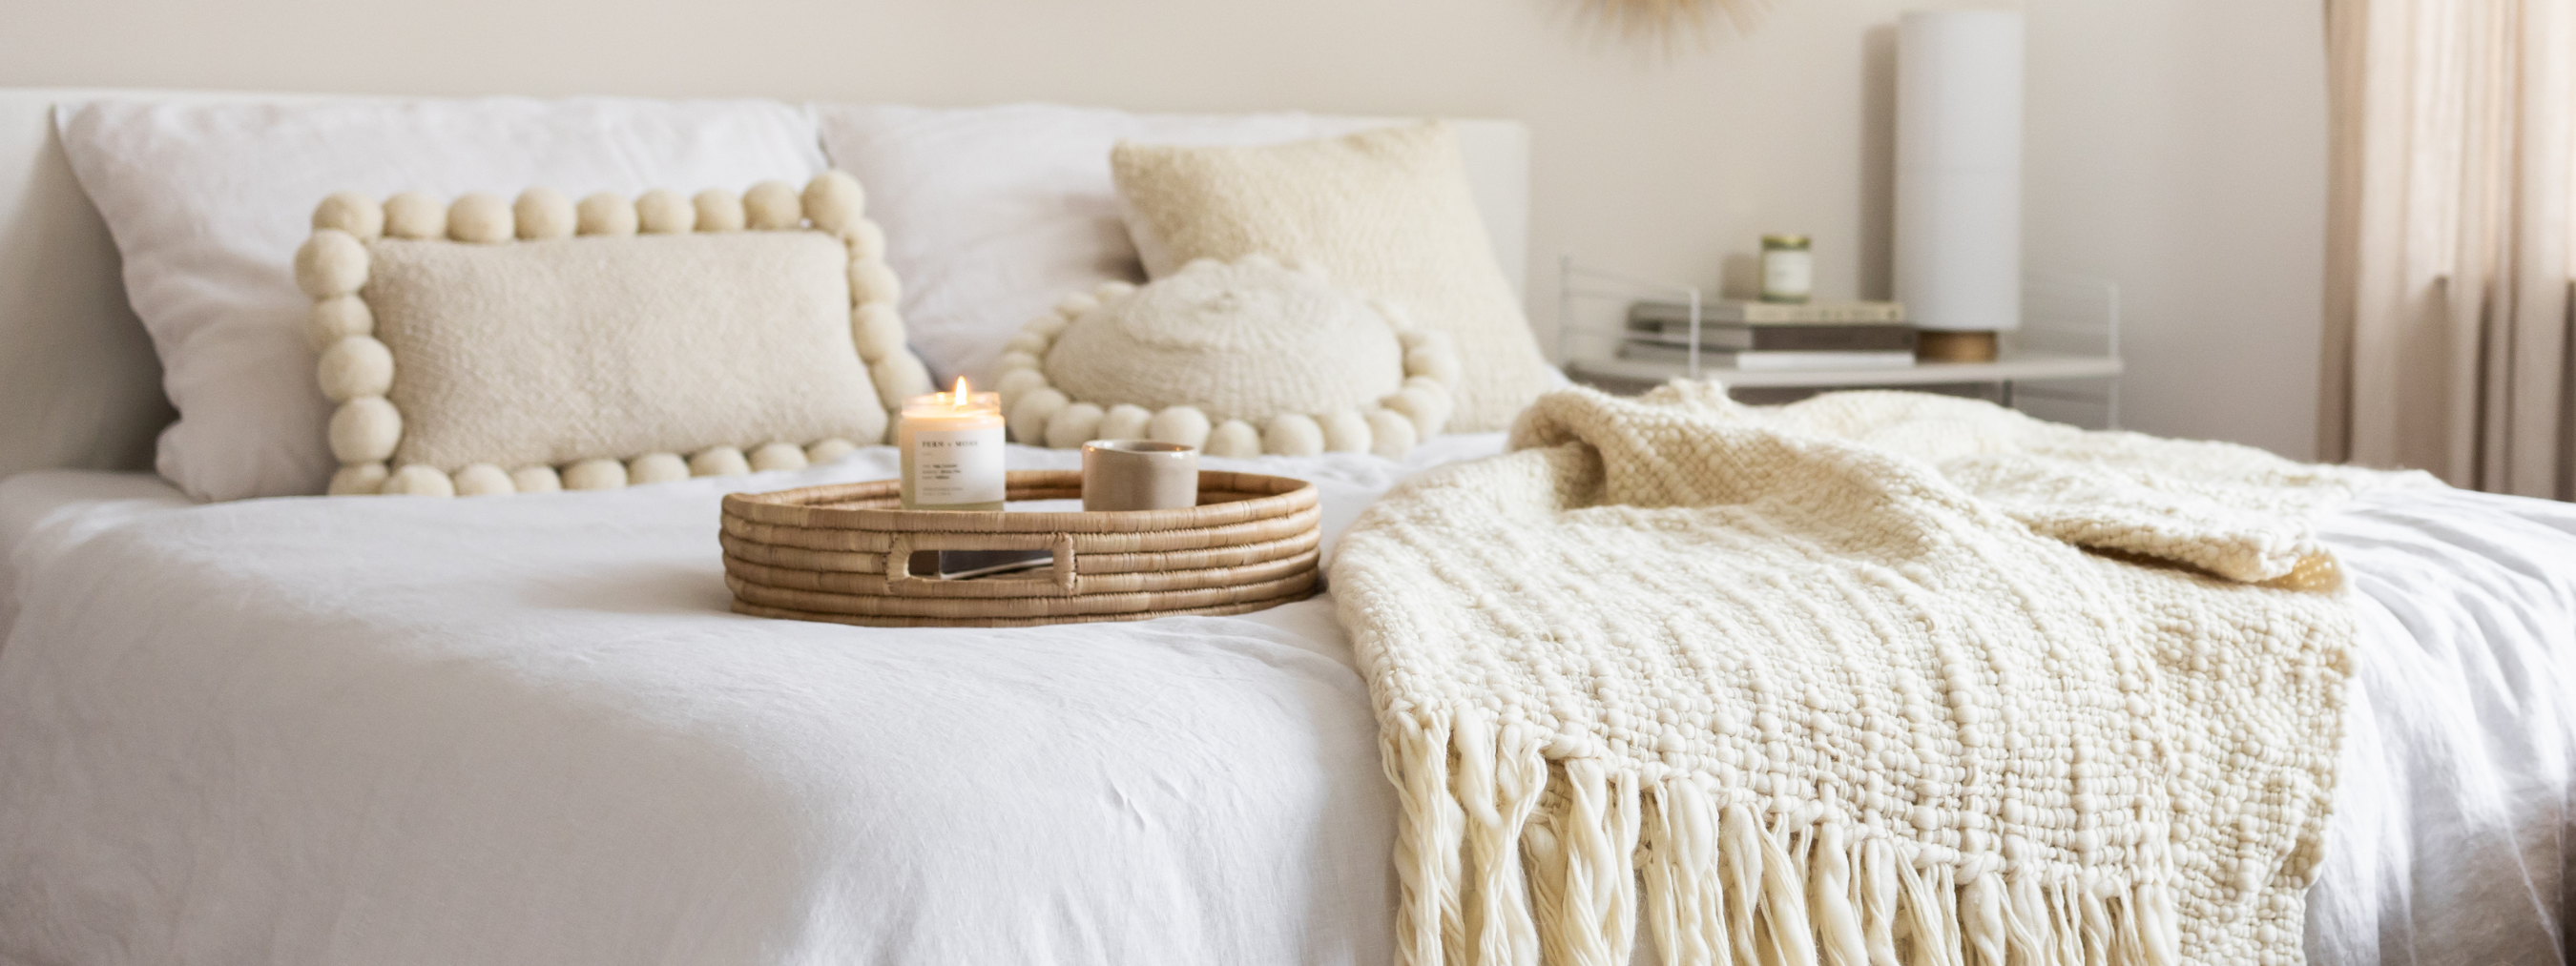 A high-quality woollen blanket in the bedroom makes you feel cozy. - By Native